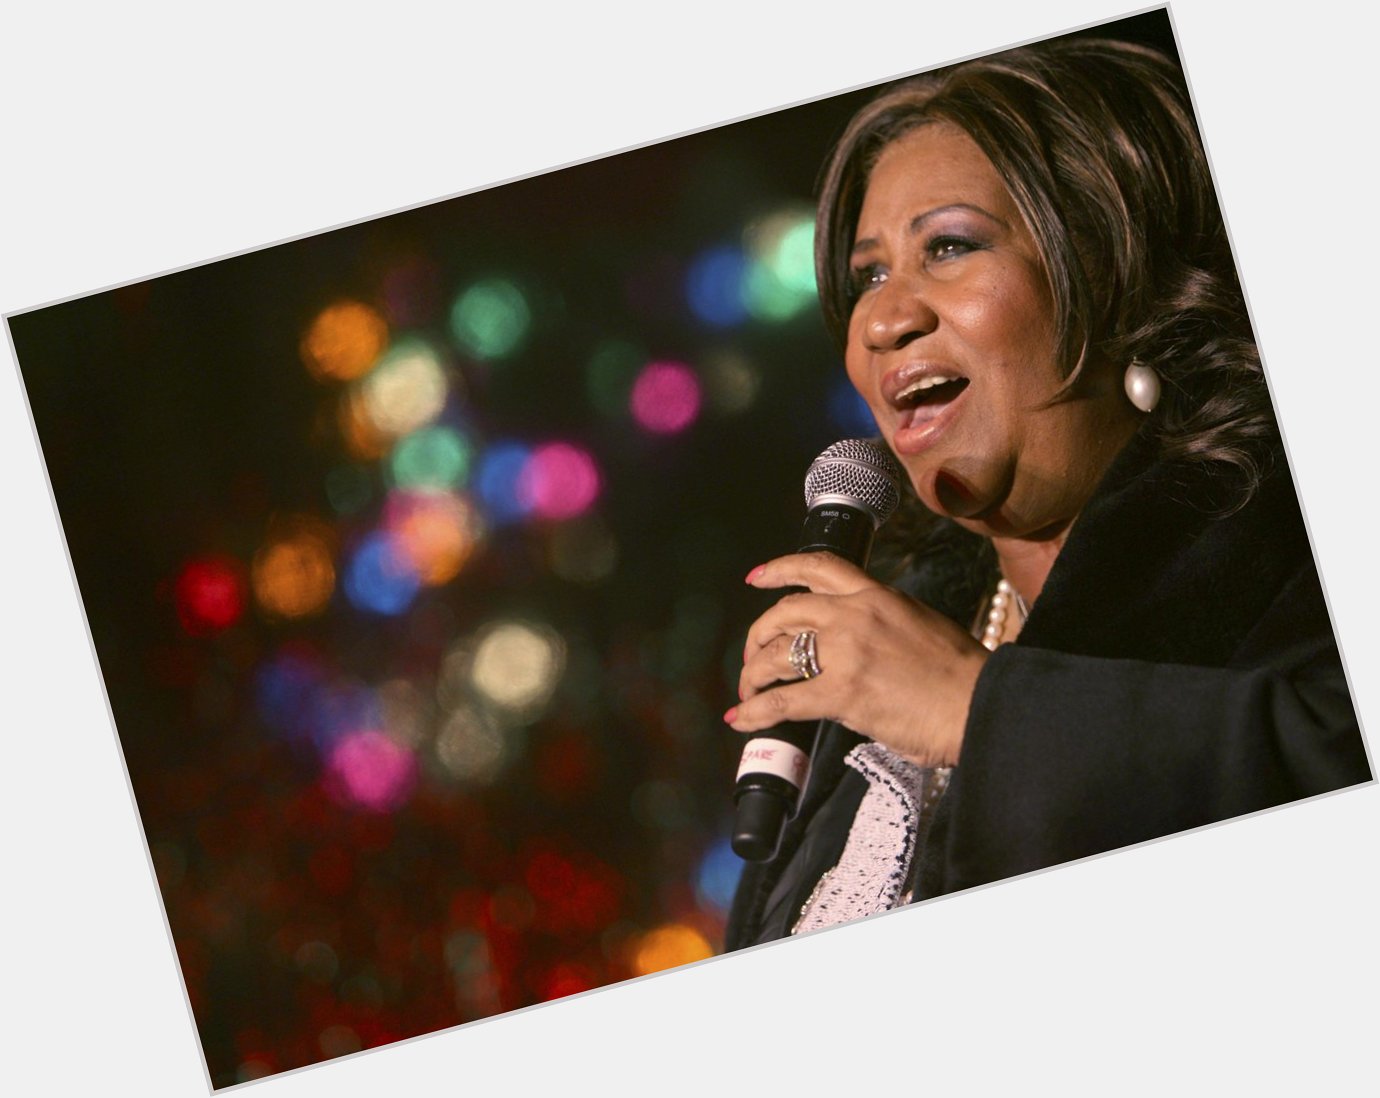 The Queen of Soul turns 73 today. Happy birthday to 